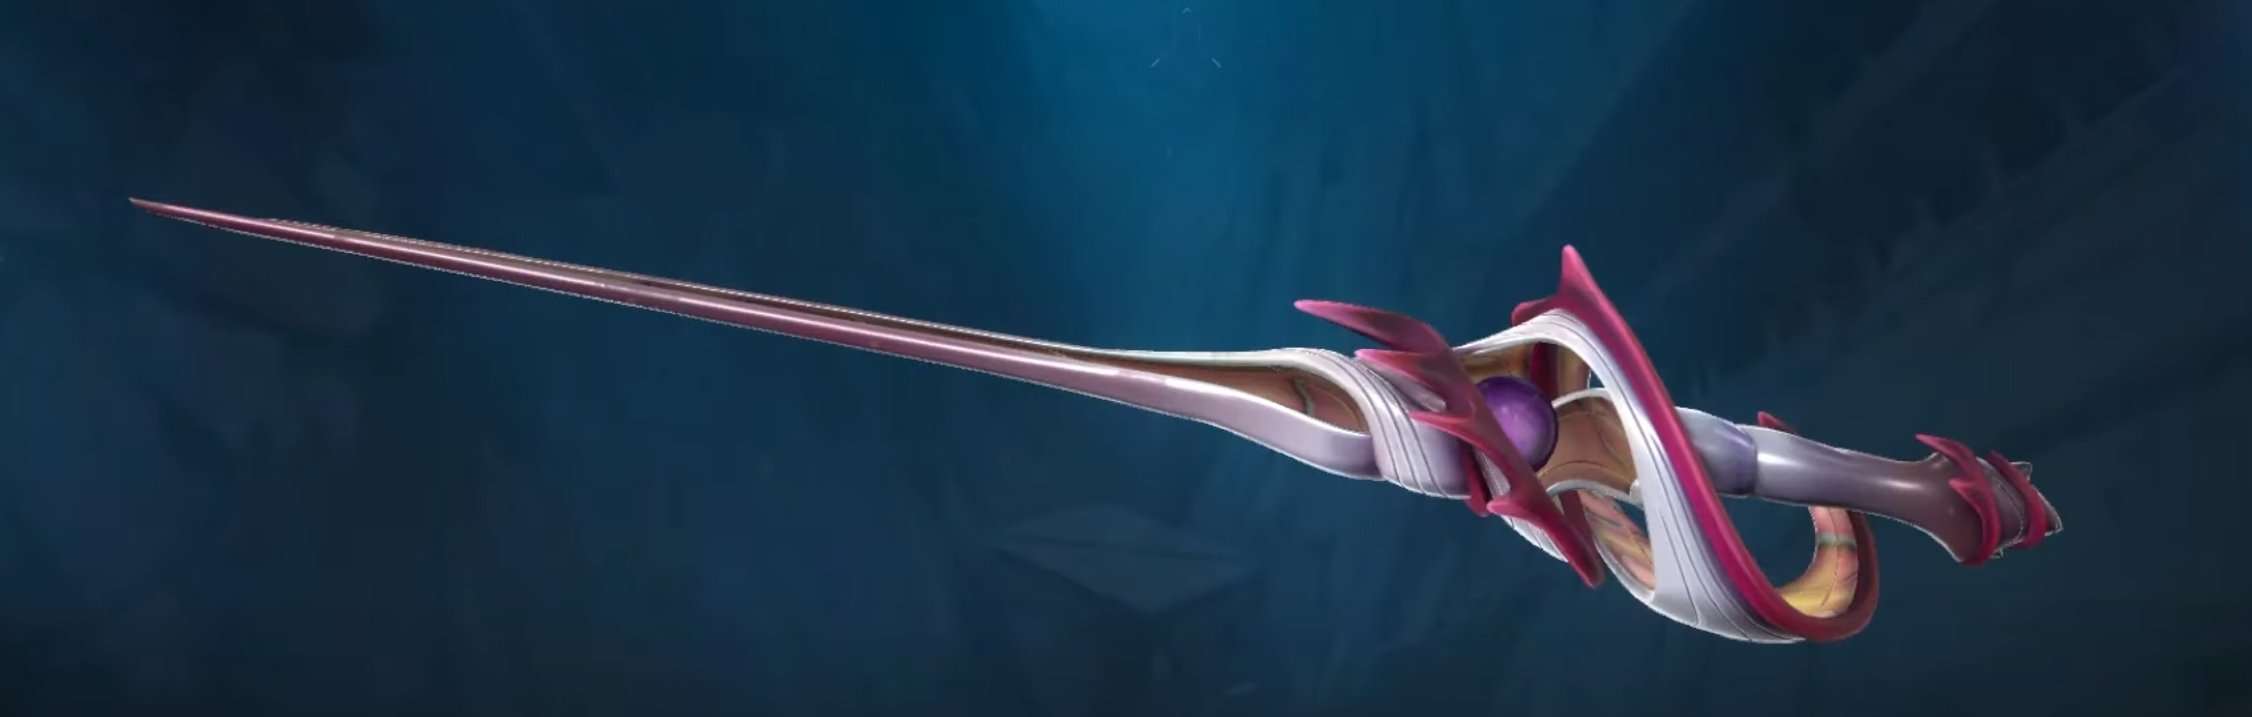 The Shellspire Sword is designed similarly to the Artisan Foil from an earlier Battlepass. Source: Riot Games and @ValorantUpdated on Twitter.com